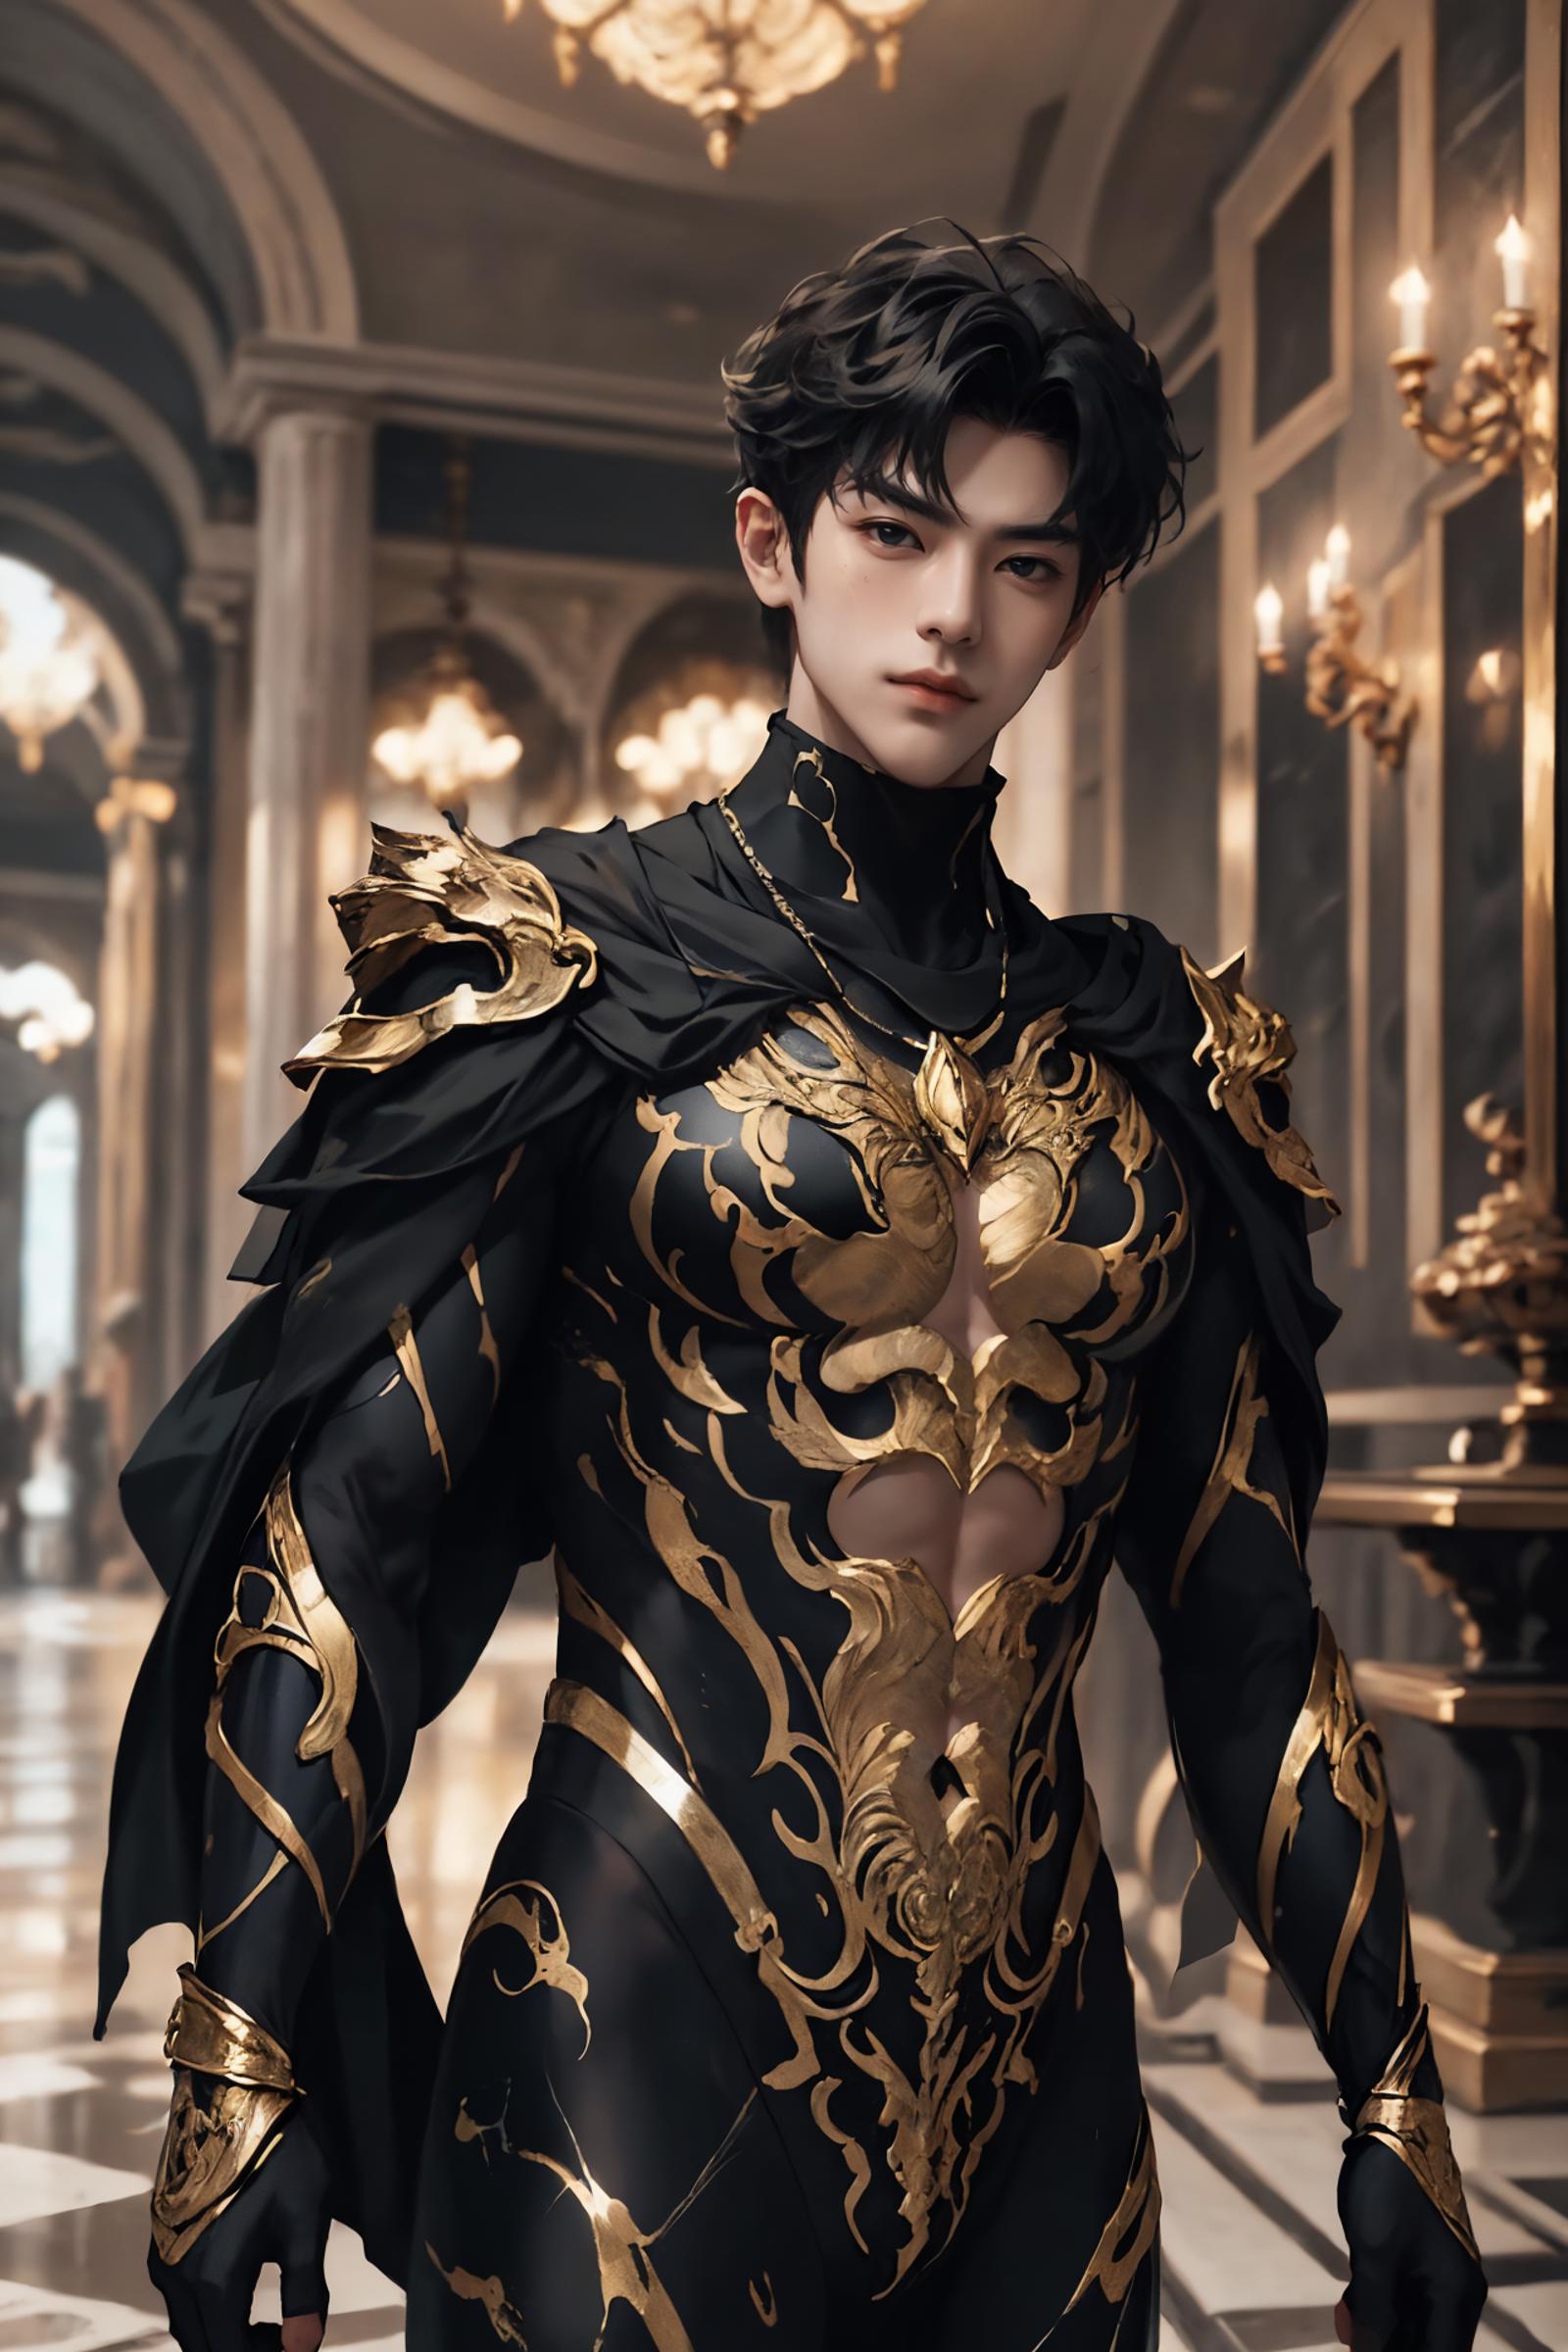 Gold Black Marble Armor image by likaijingyuanyuan